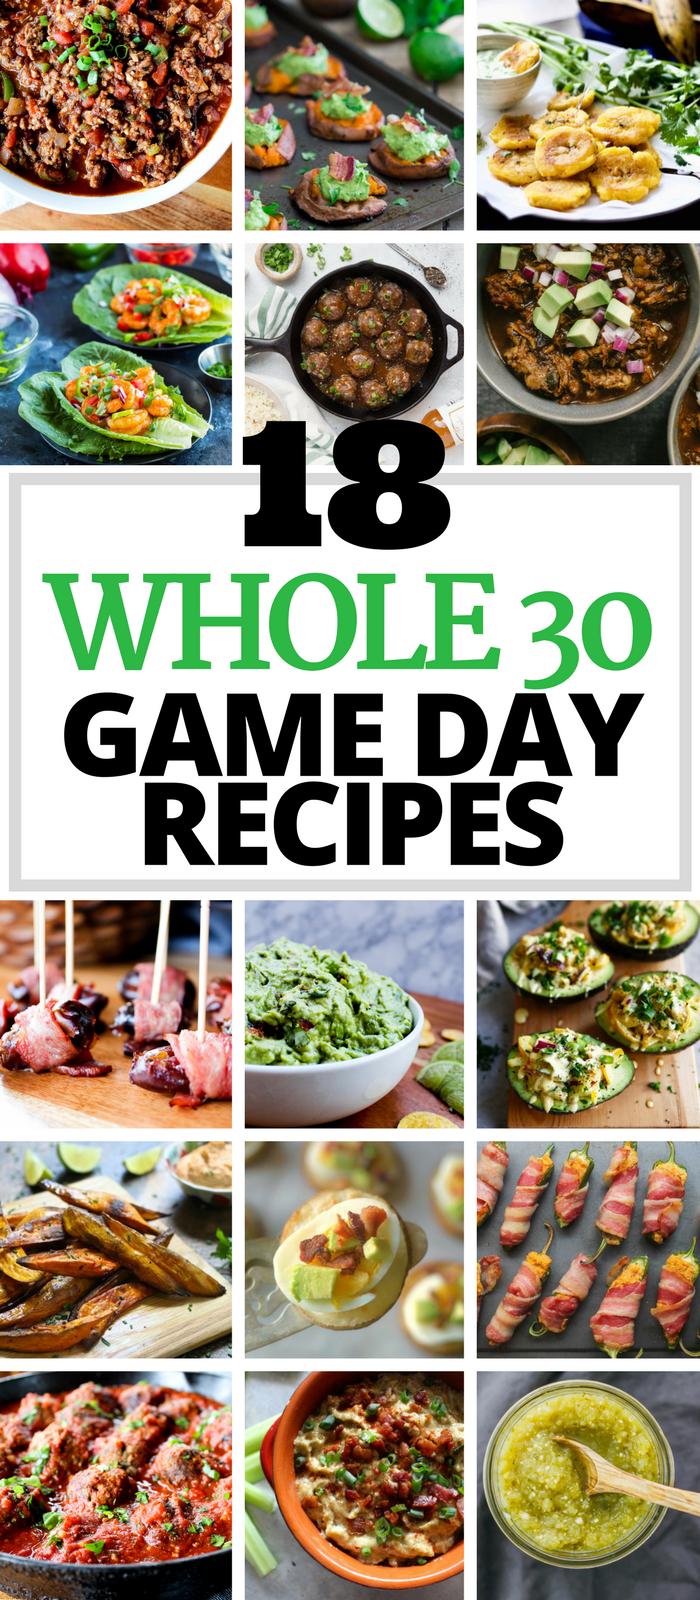 18 Whole30 Game Day Recipes via The Whole Cook